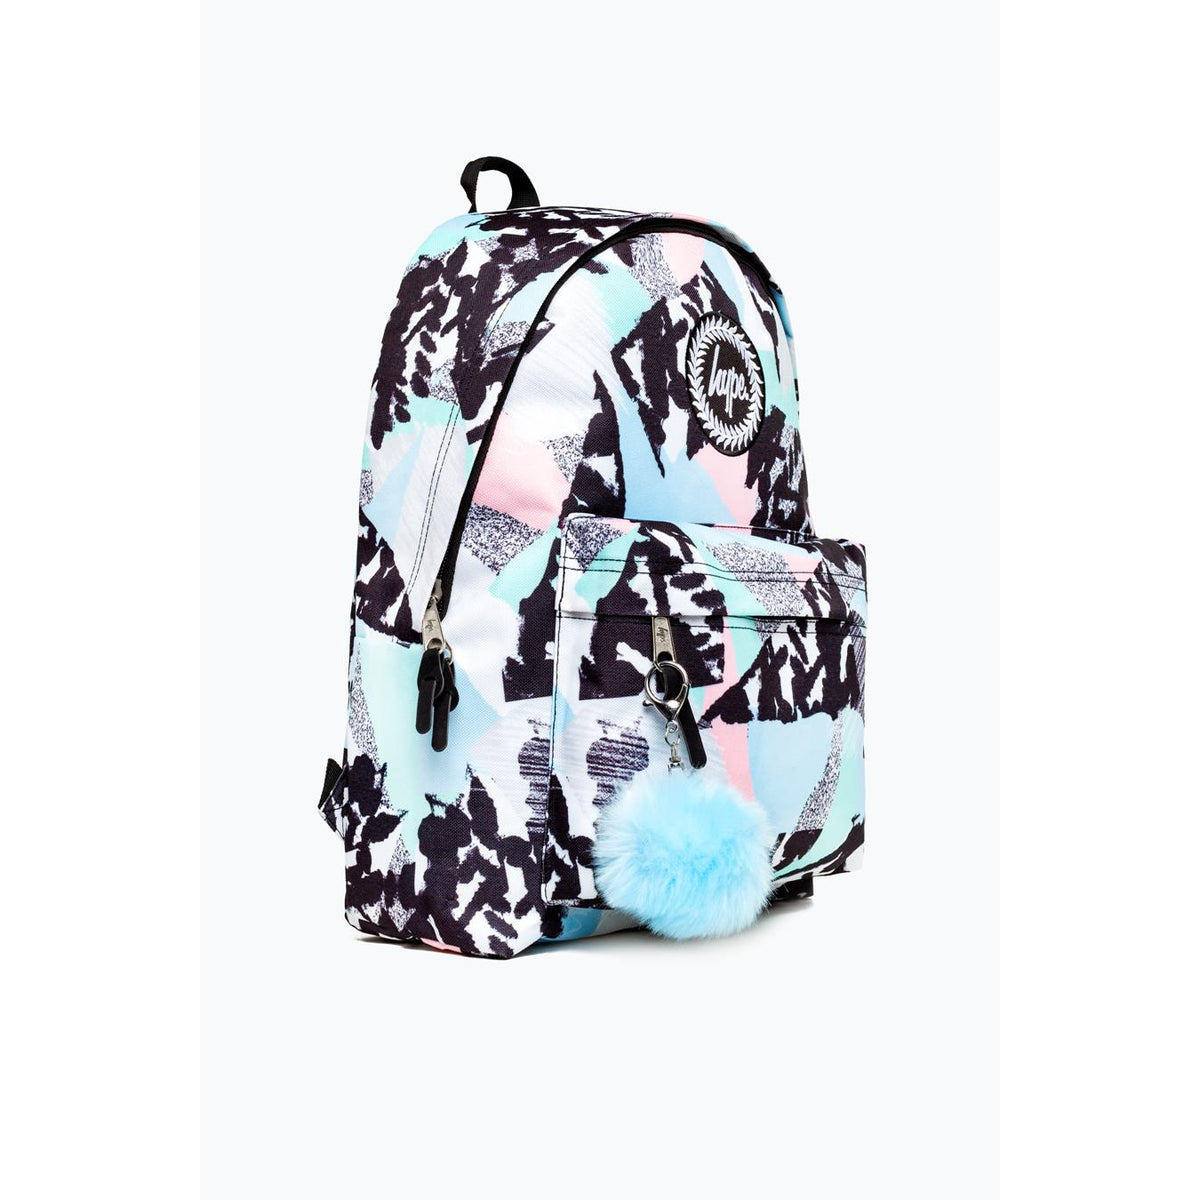 Hype Pastel Abstract Backpack - personalisation optional!